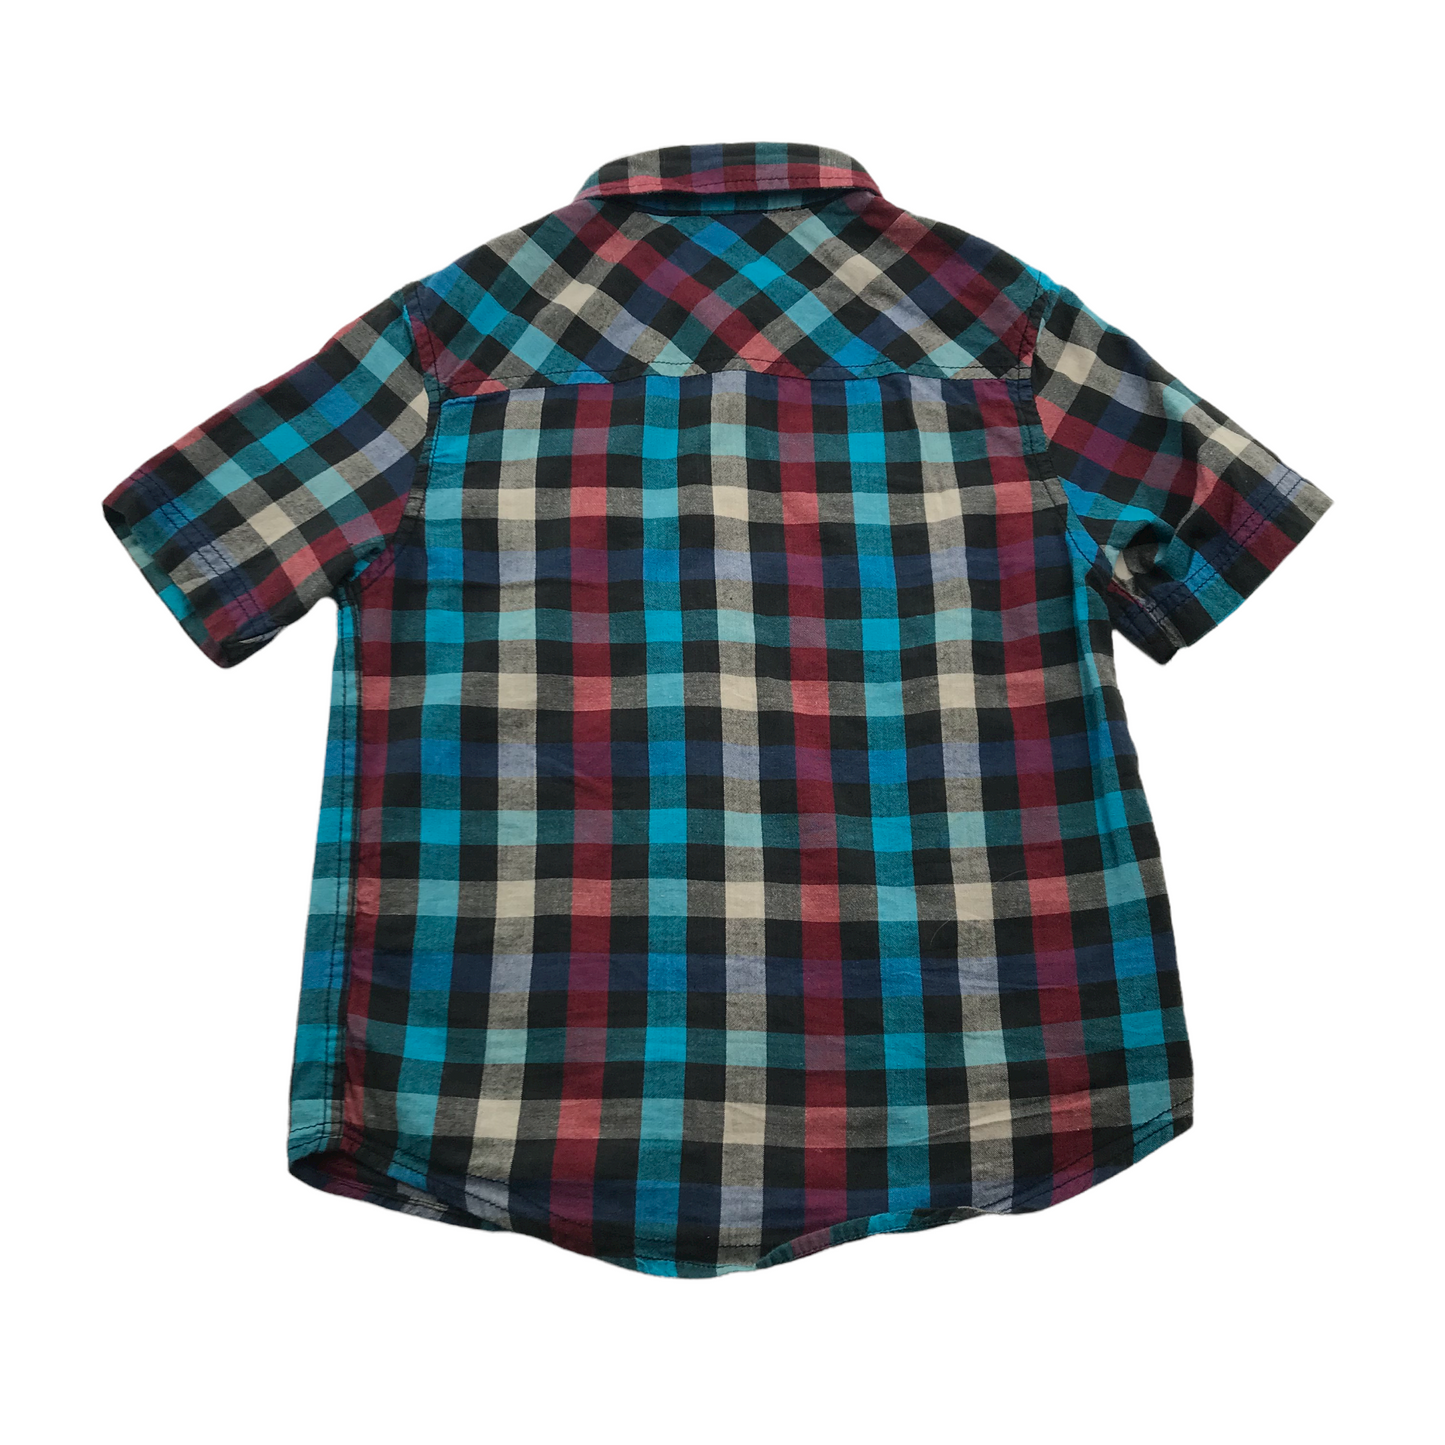 M&Co Blue Navy and Red Checked Short Sleeve Shirt Age 5